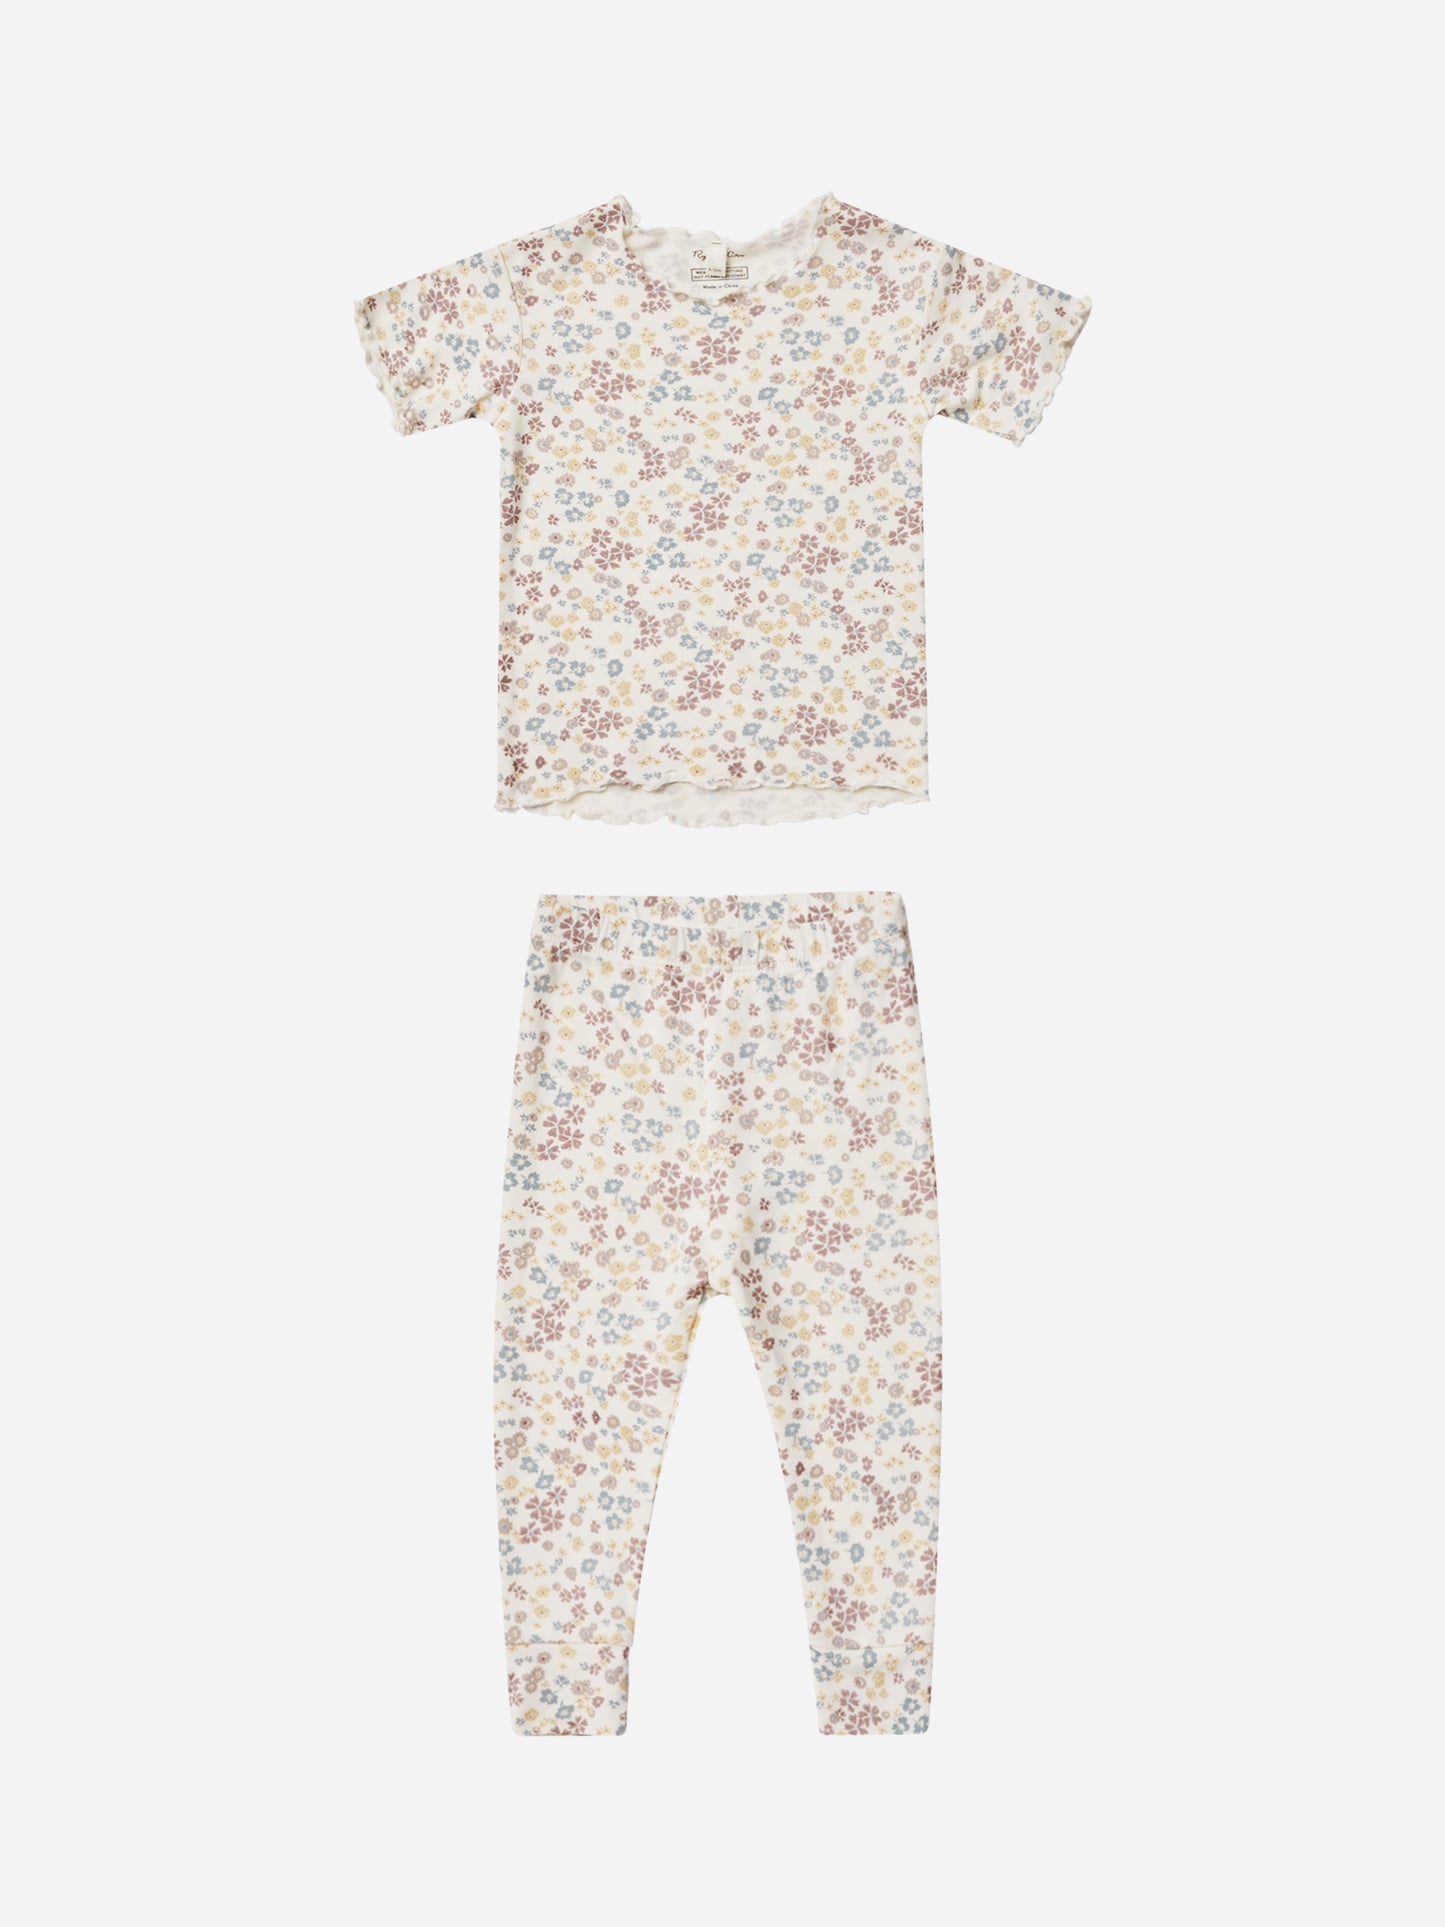 Summer Pj Set || Wild Flowers - Rylee + Cru | Kids Clothes | Trendy Baby Clothes | Modern Infant Outfits |